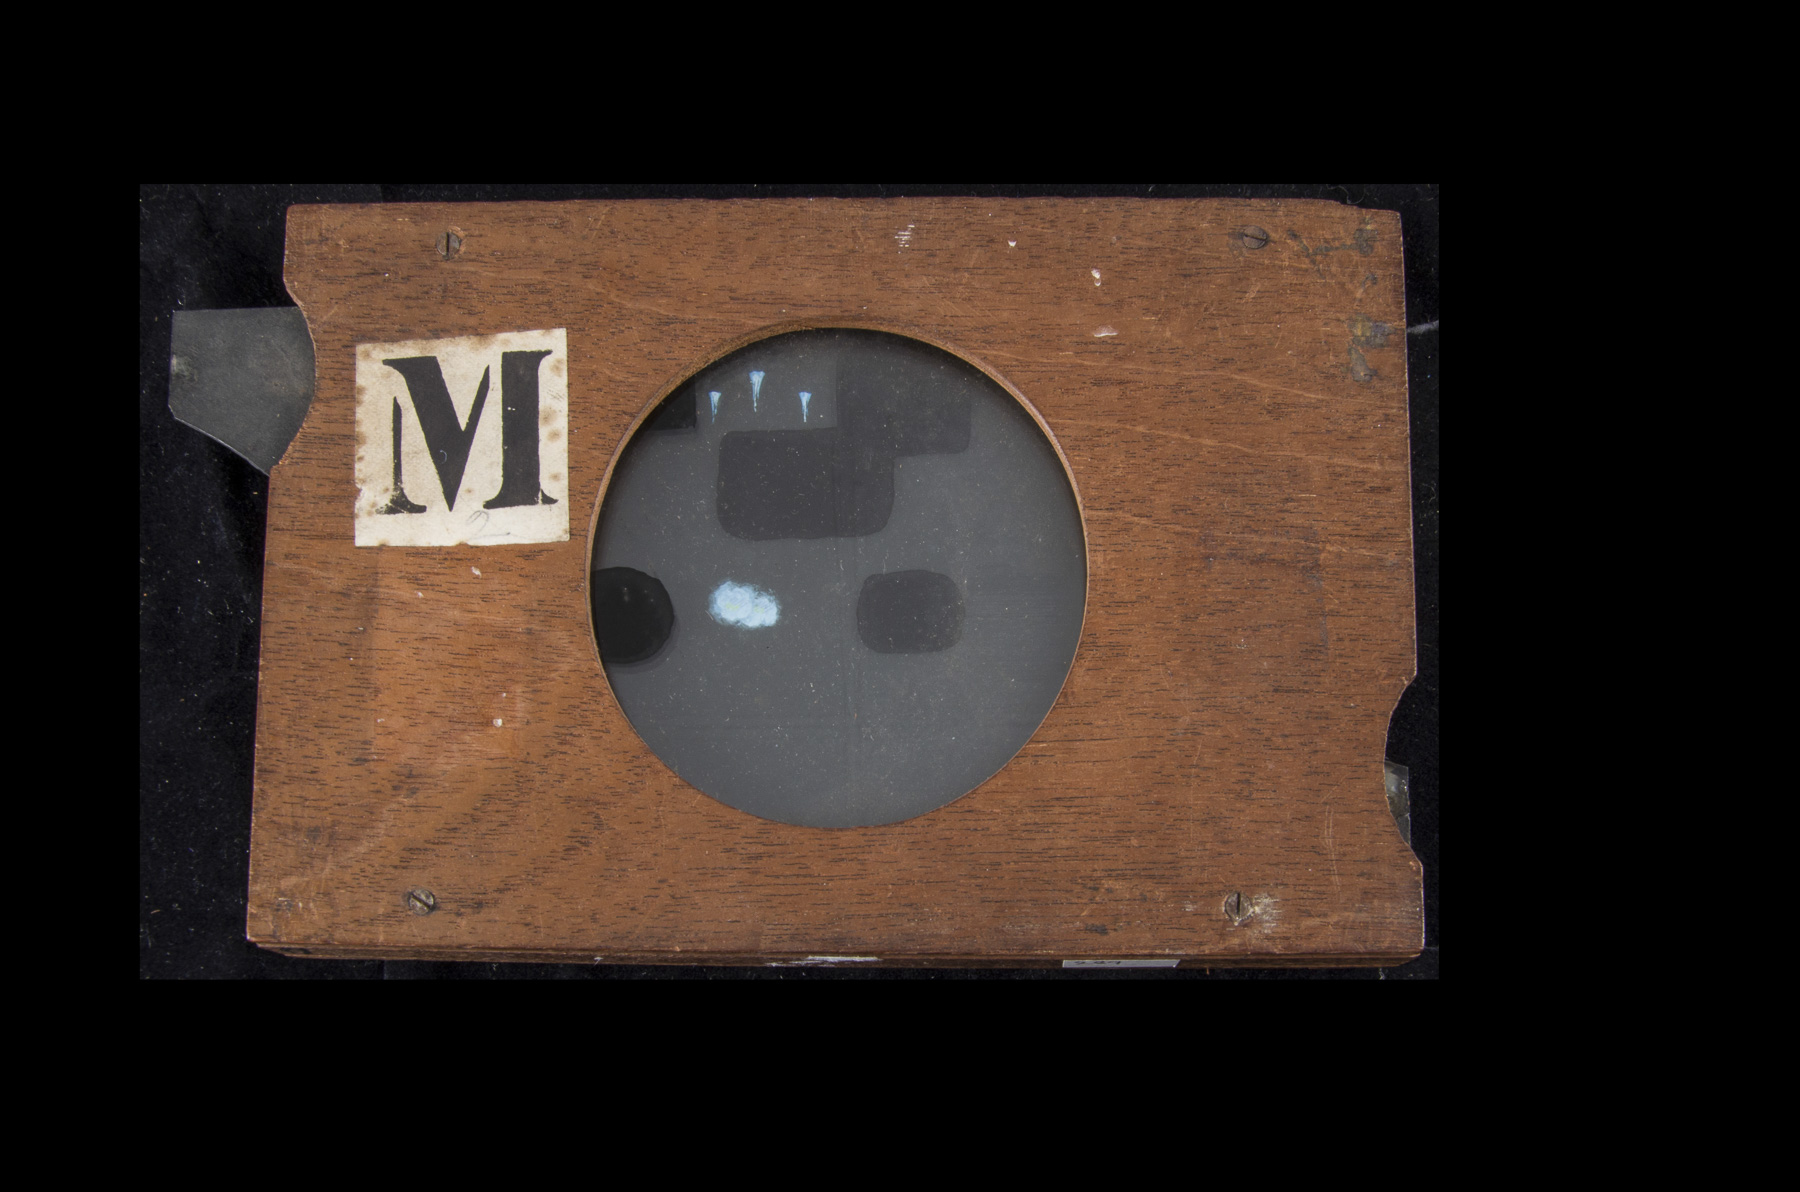 Seven Mahogany-Mounted Hand-Coloured Magic Lantern Slides with Nautical Scenes, including one of - Image 6 of 7